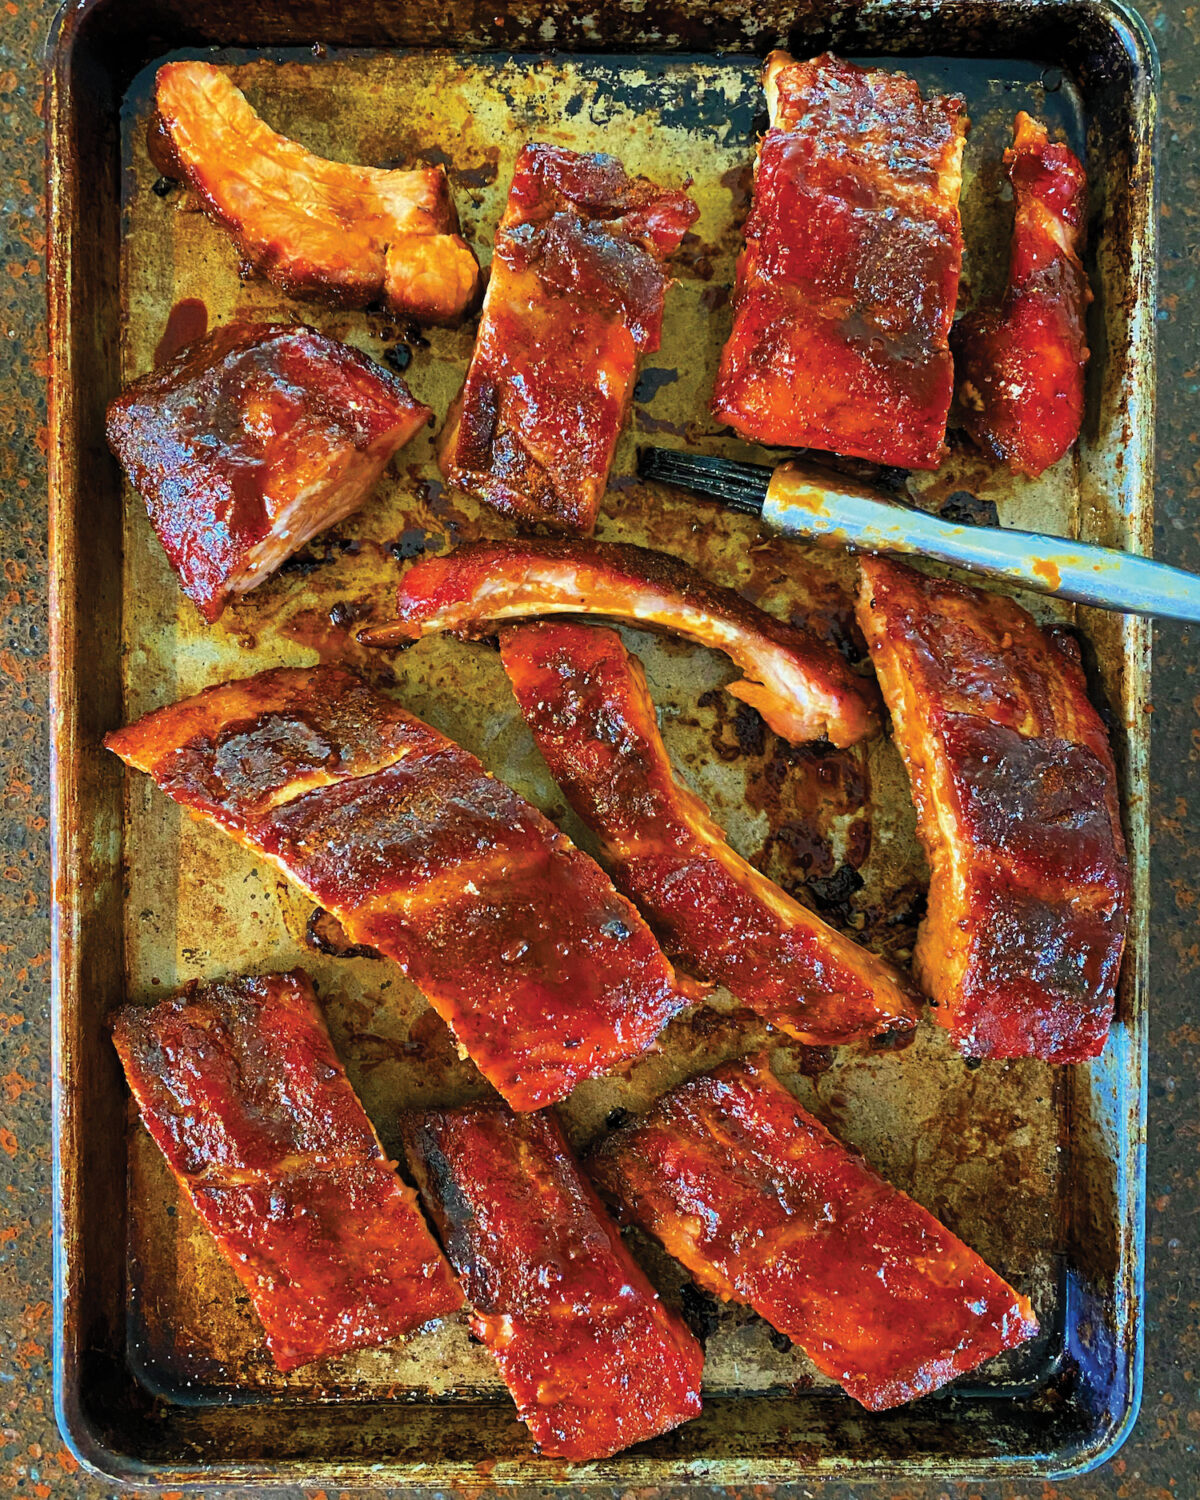 A salty-sweet rub gives these ribs an extra layer of flavor, while encouraging tender, juicy meat with that coveted crispy bark. (Lynda Balslev for Tastefood)